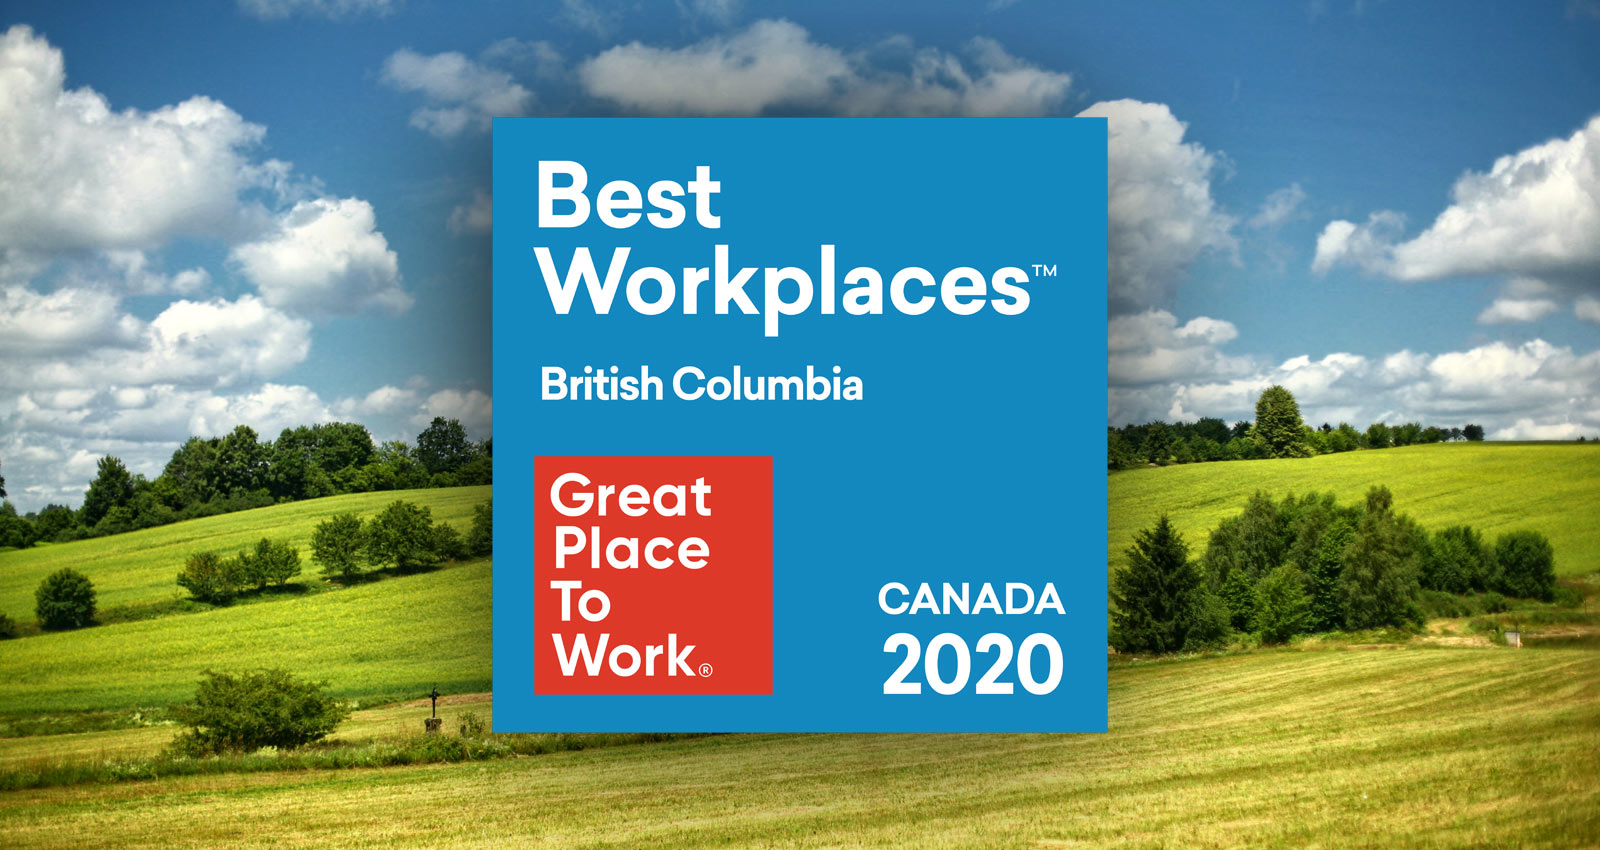 Premier Cloud Voted Great Place to Work in 2020